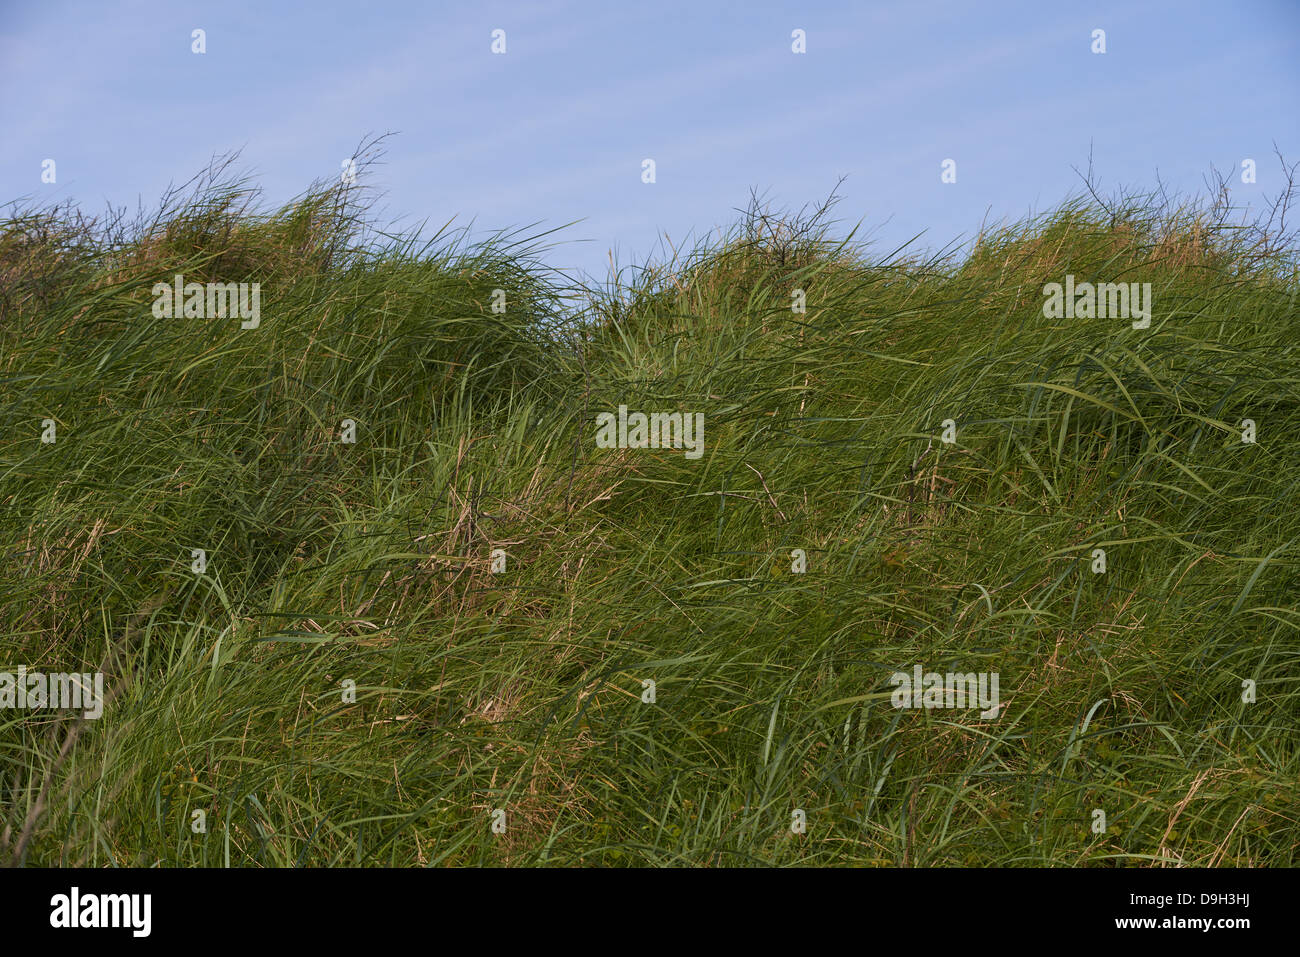 Grass, Green subject, Green and blue sky background Stock Photo